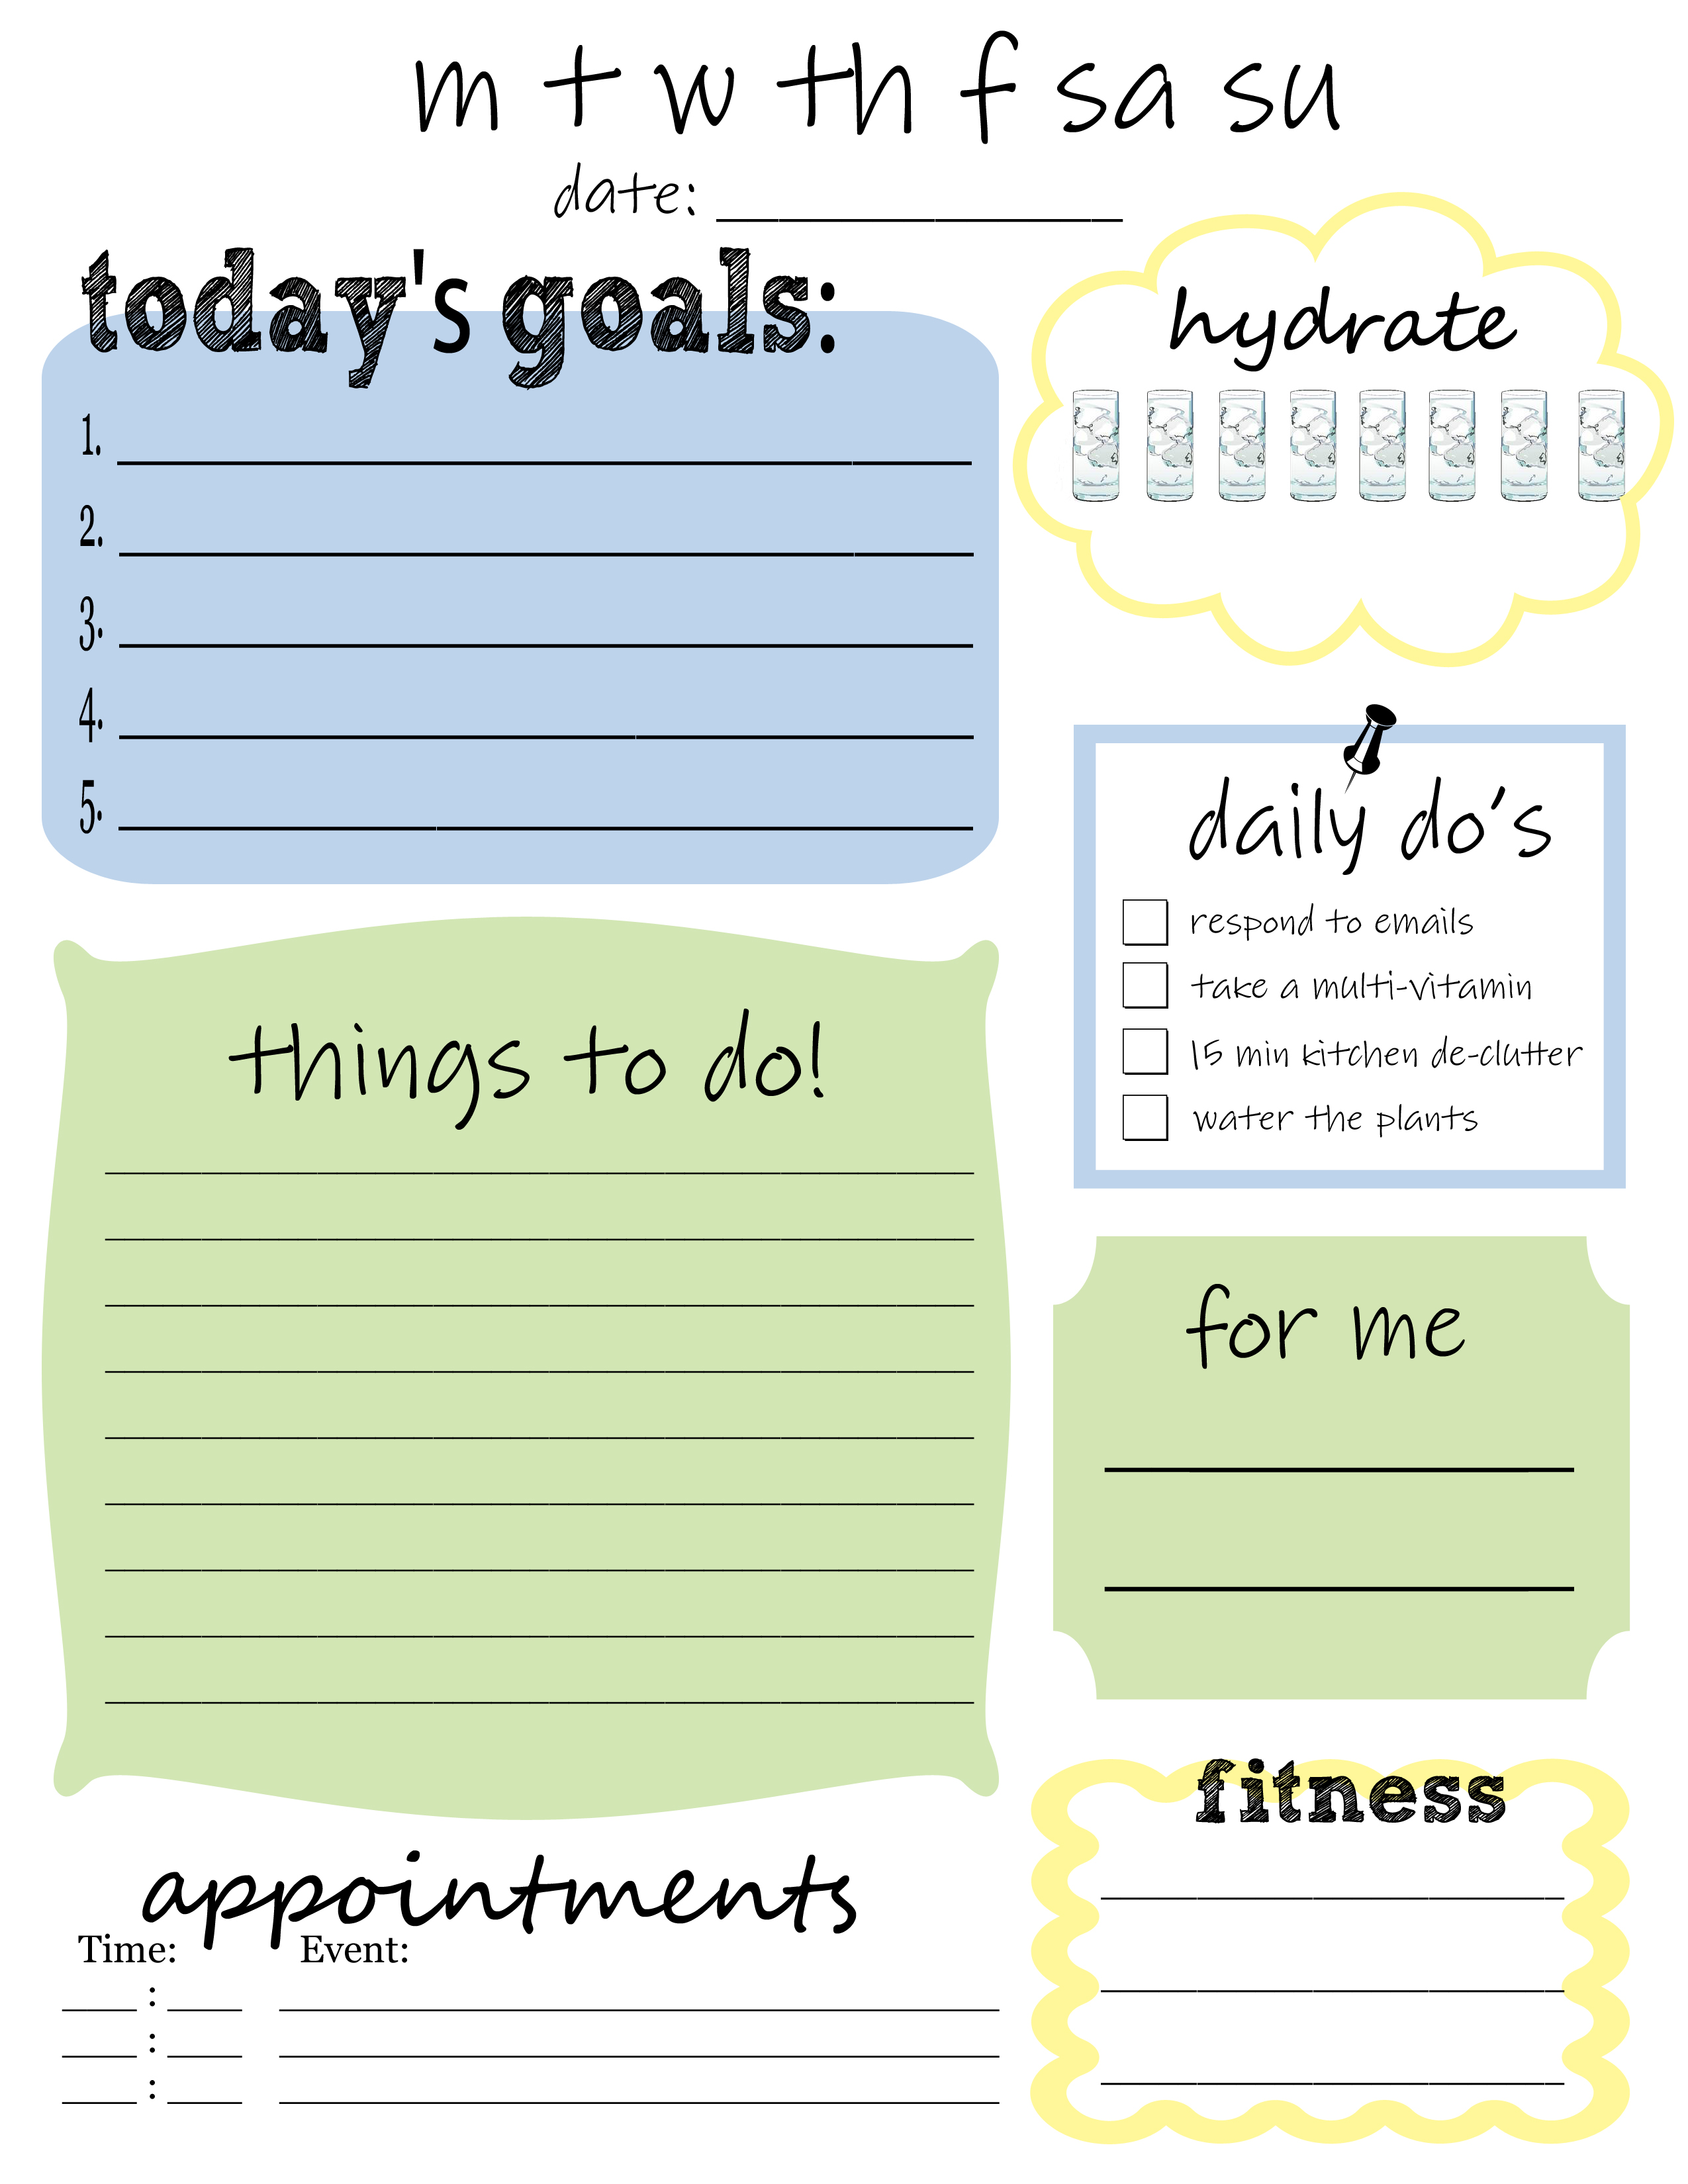 7 Best Images of Printable Daily To Do List For Work - Simple to Do